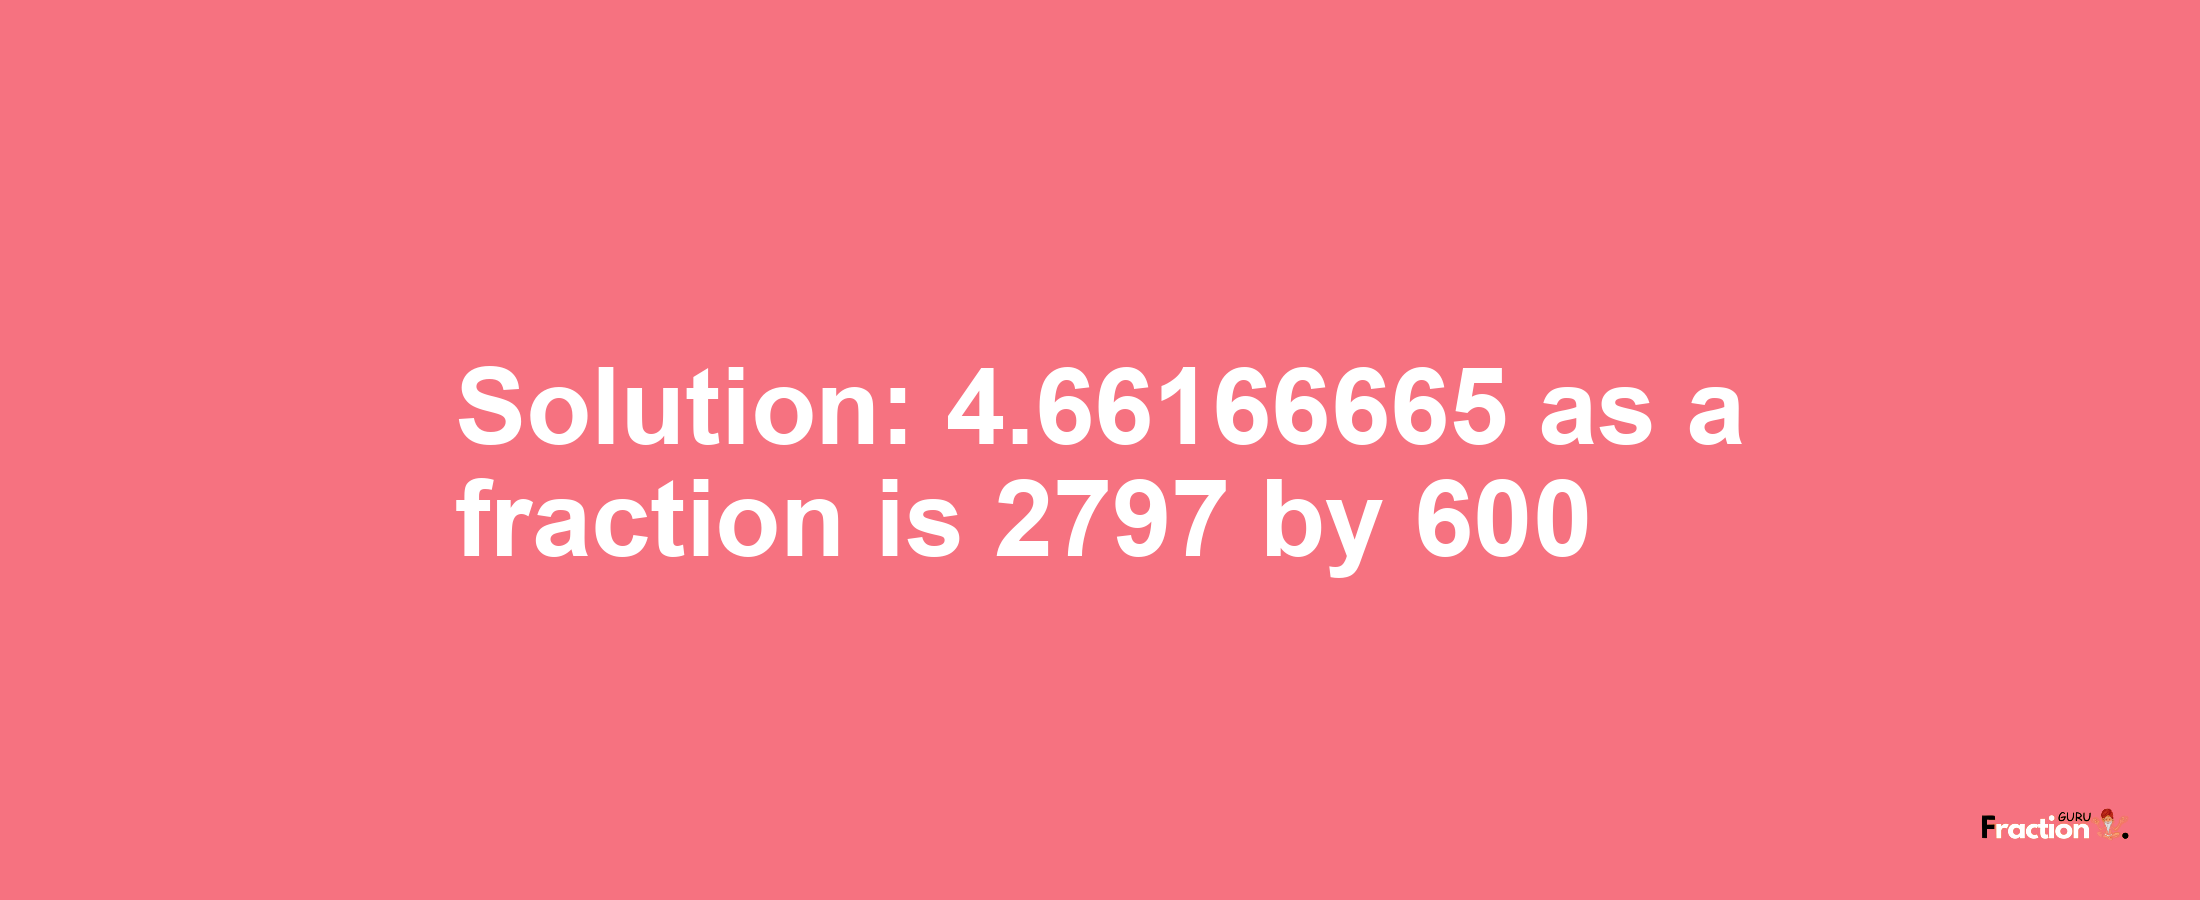 Solution:4.66166665 as a fraction is 2797/600